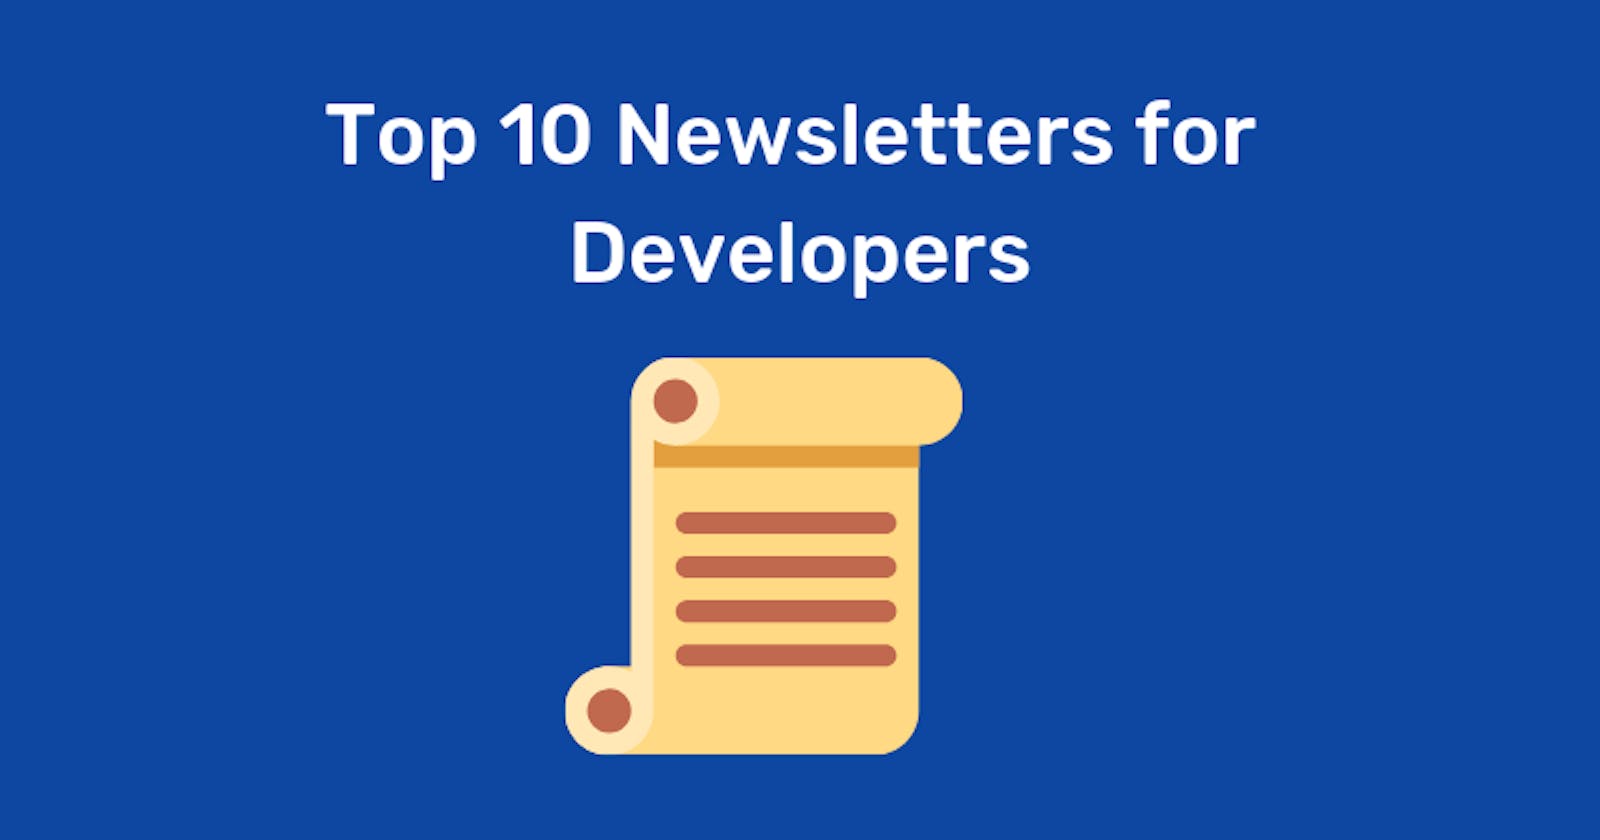 Top 10 Newsletters for Developers